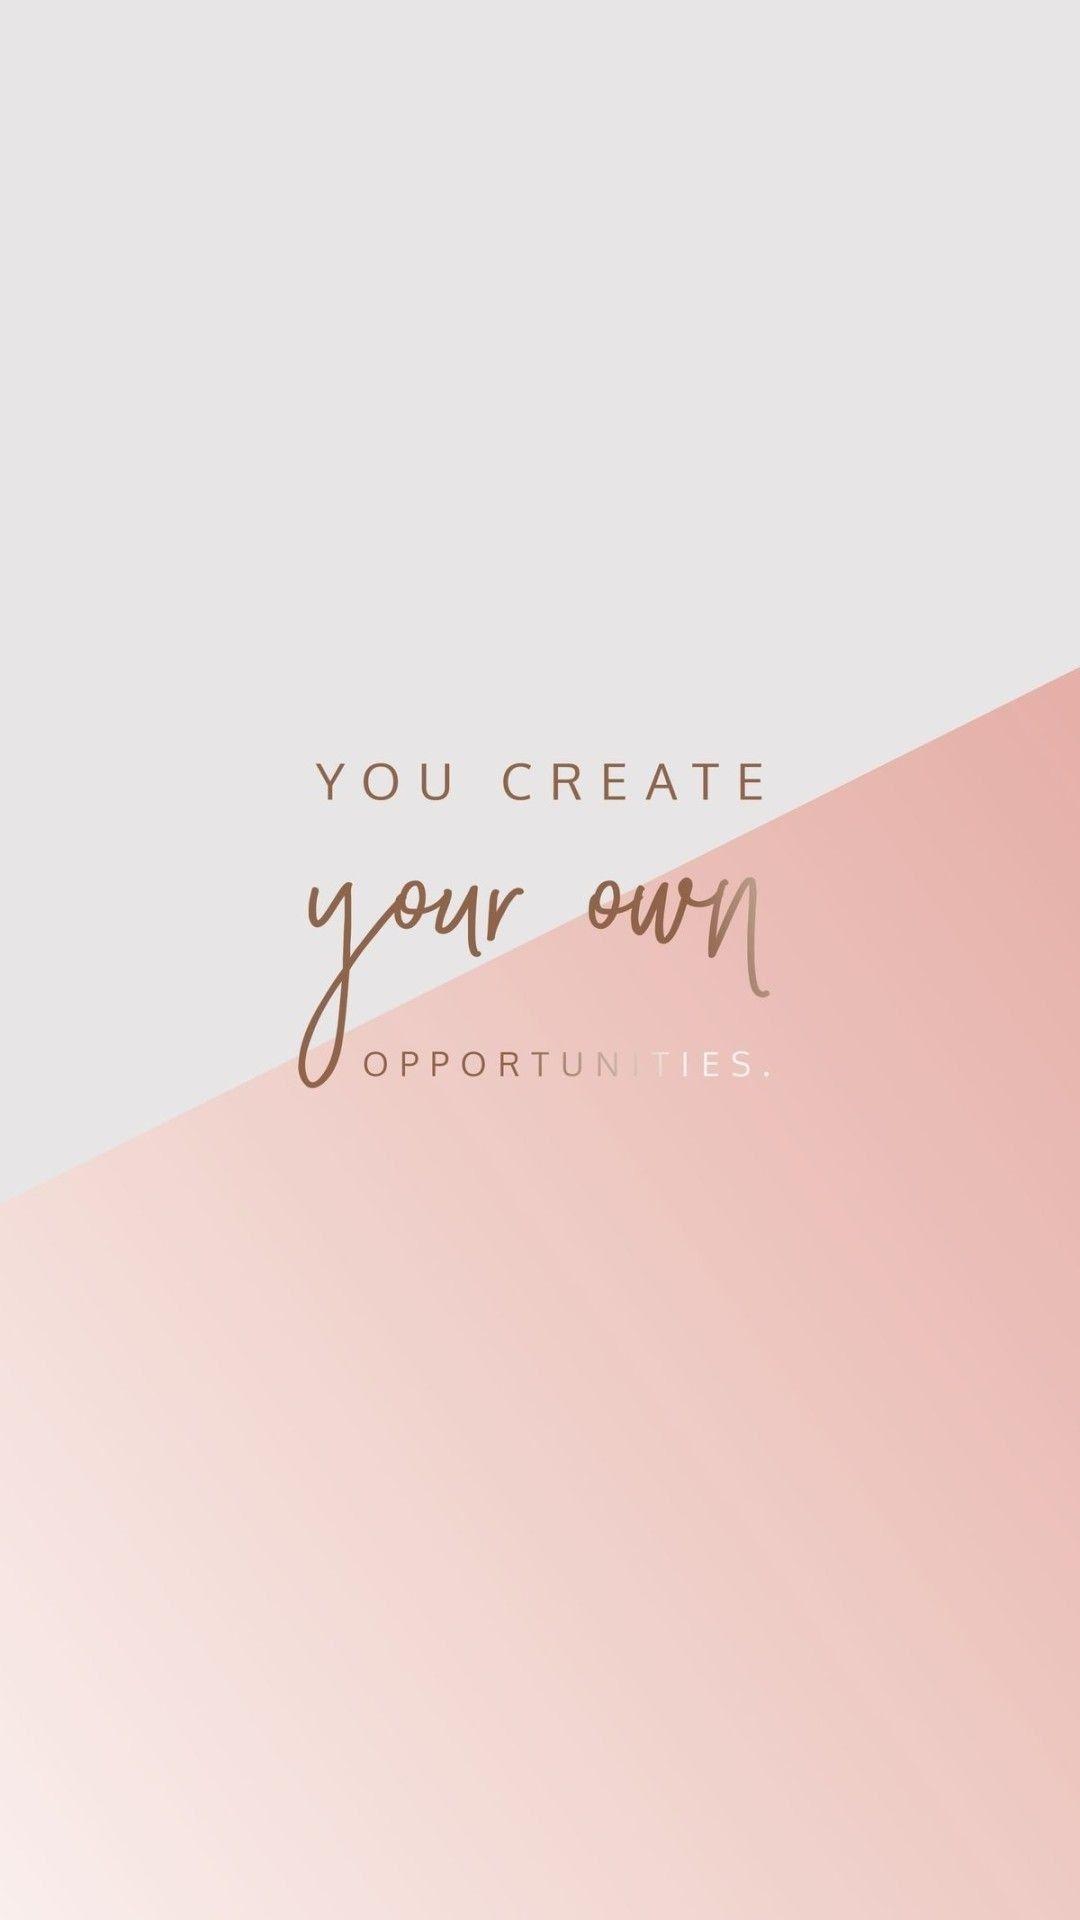 Free aesthetic phone wallpaper templates to customize  Canva